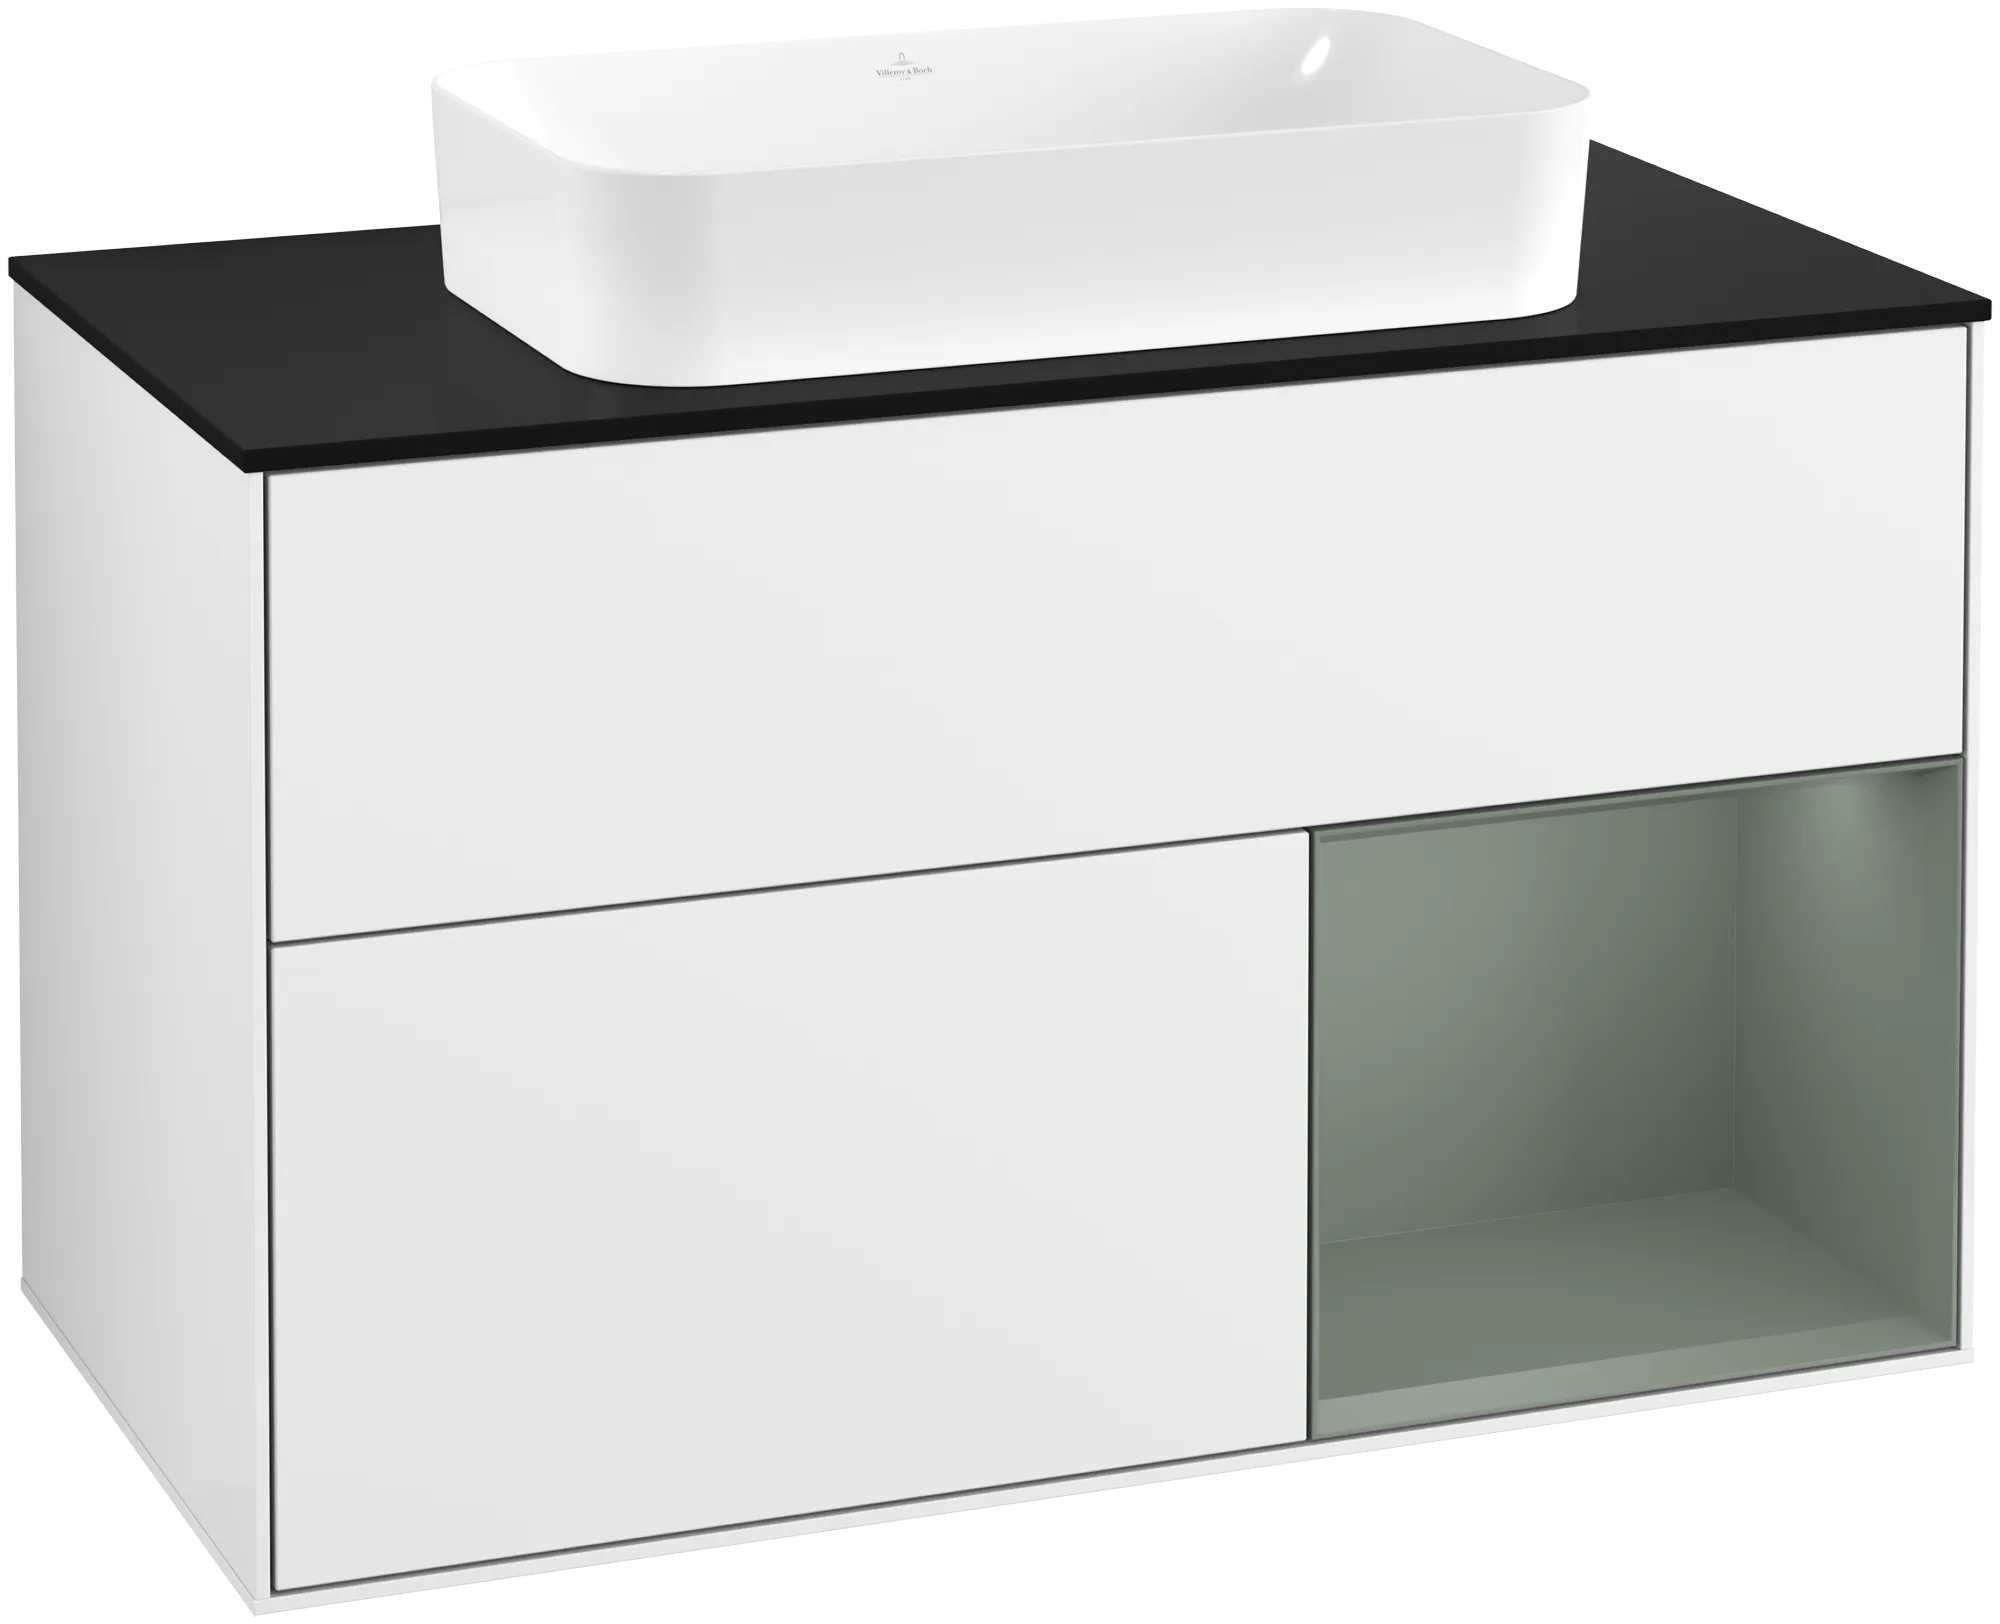 Picture of VILLEROY BOCH Finion Vanity unit, with lighting, 2 pull-out compartments, 1000 x 603 x 501 mm, Glossy White Lacquer / Olive Matt Lacquer / Glass Black Matt #G662GMGF